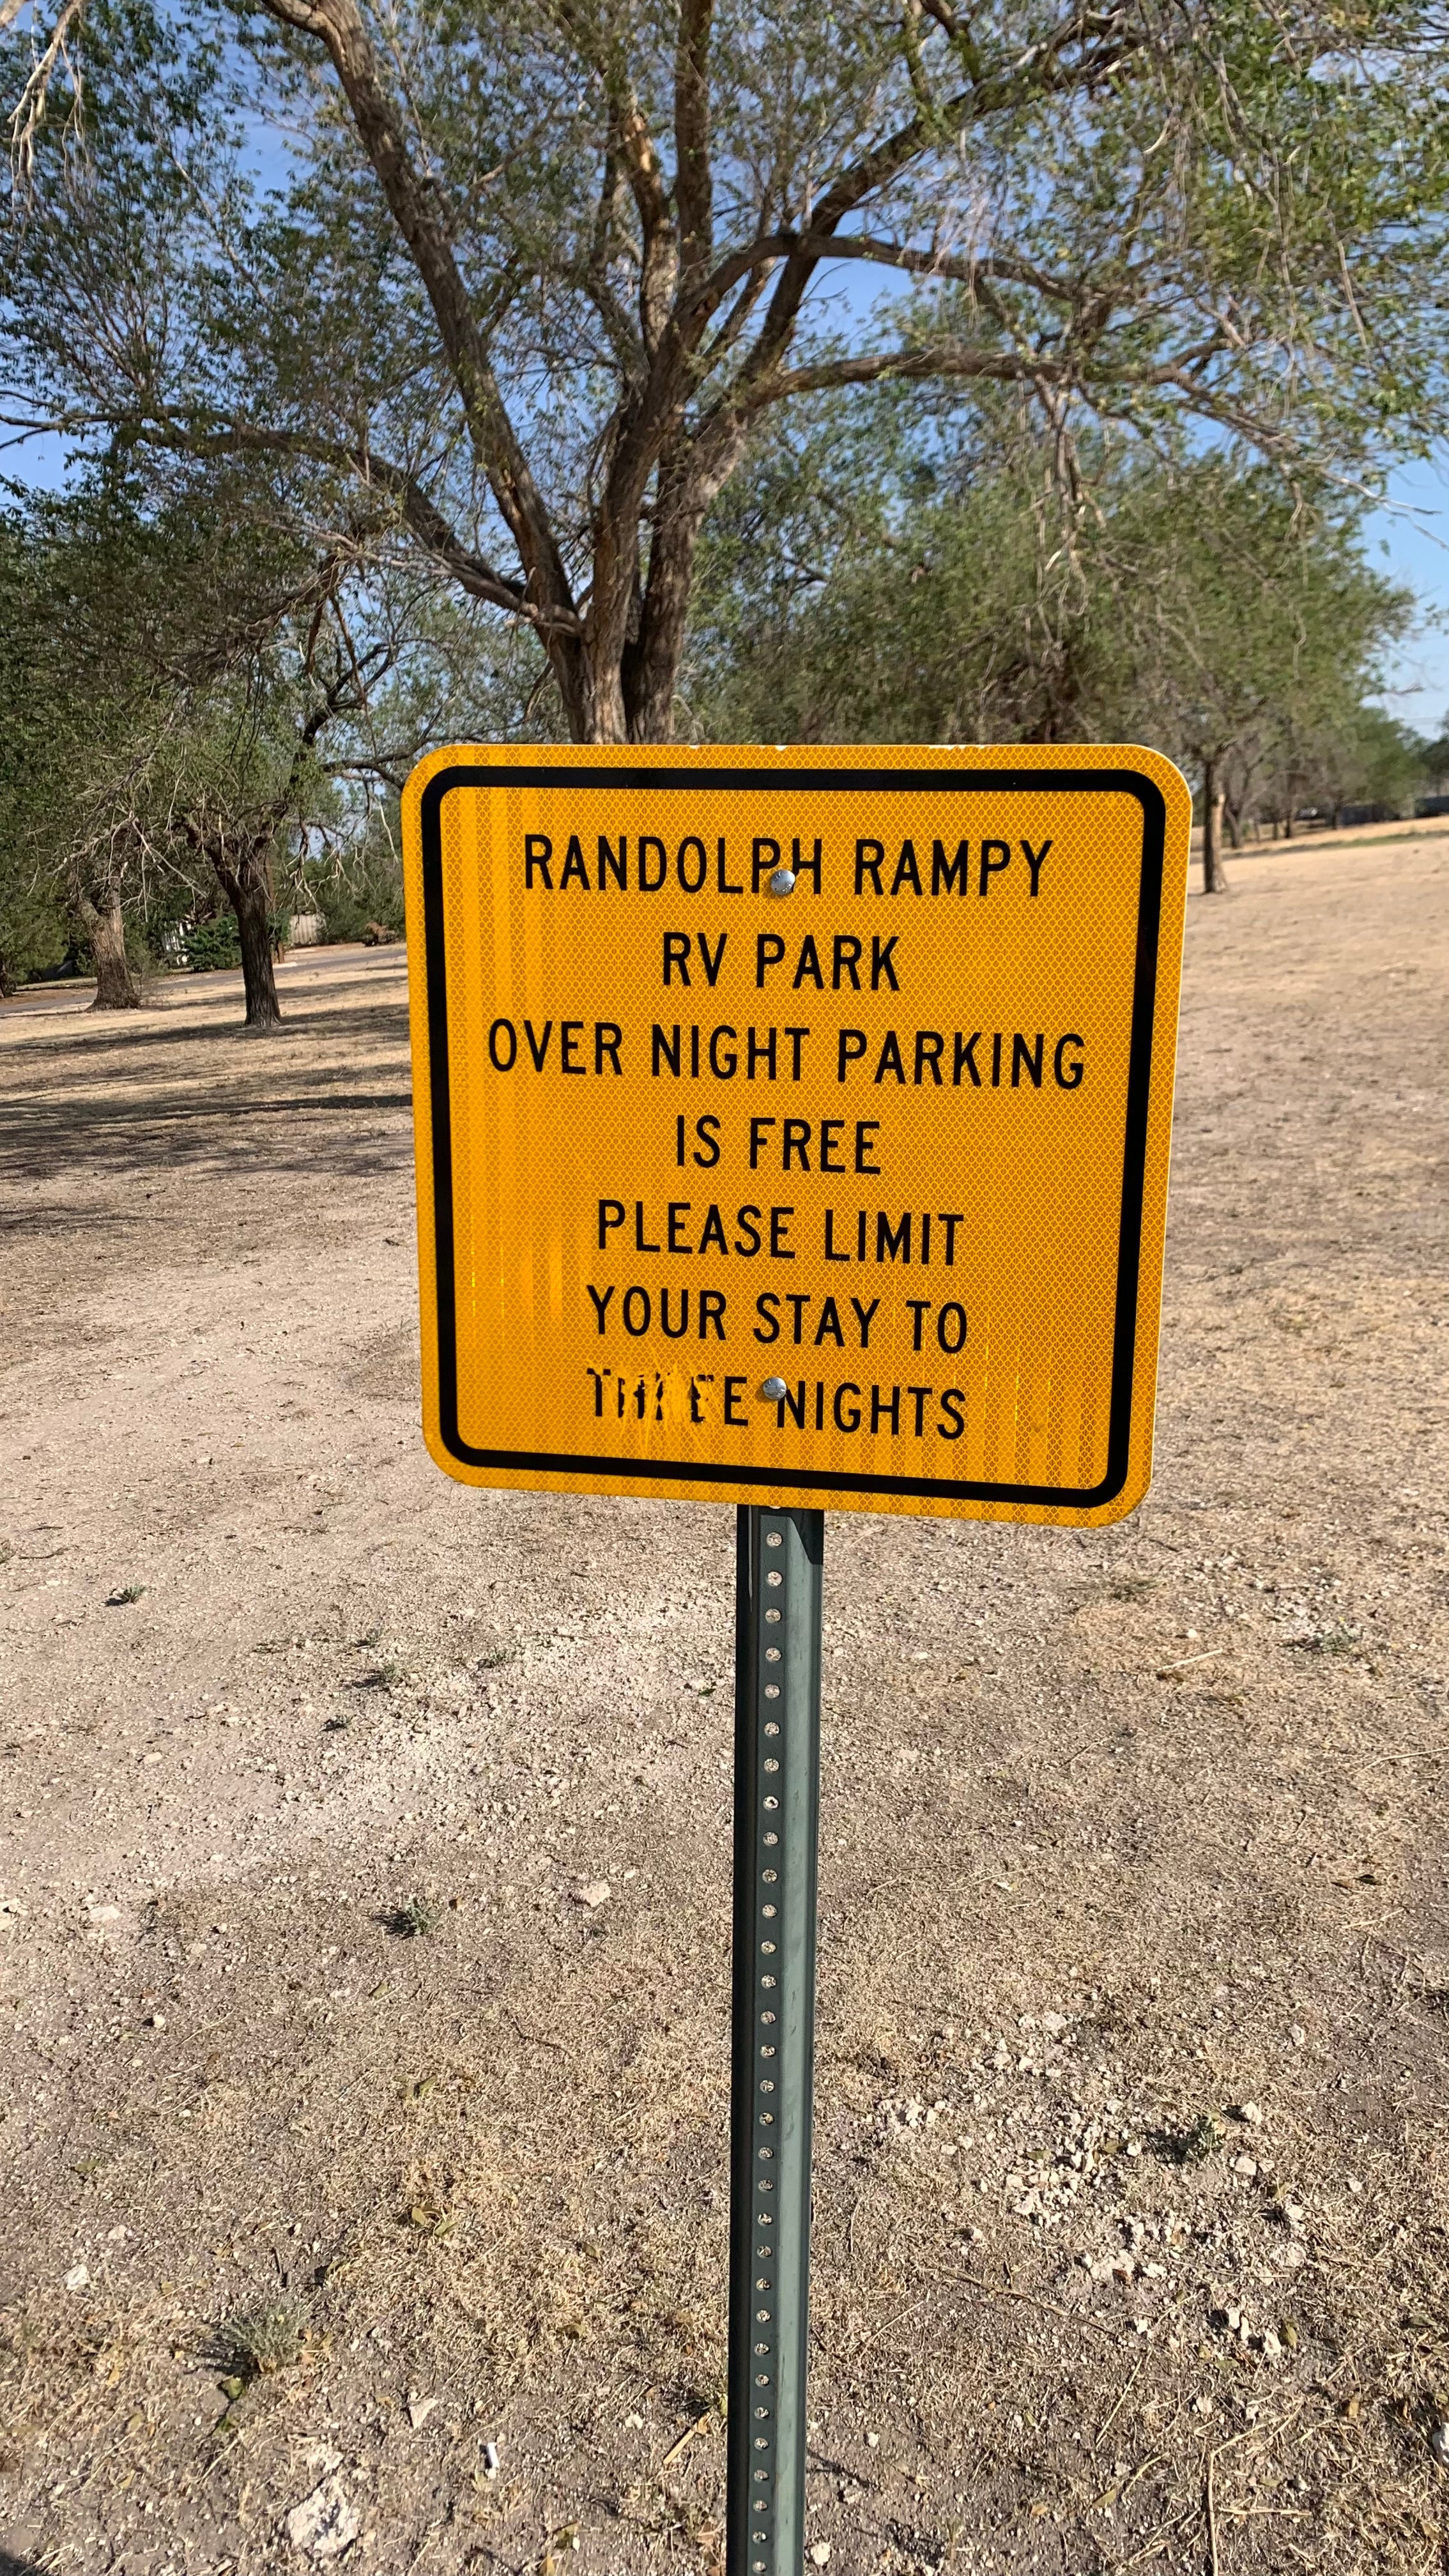 Camper submitted image from Randolph Rampy Park - 1